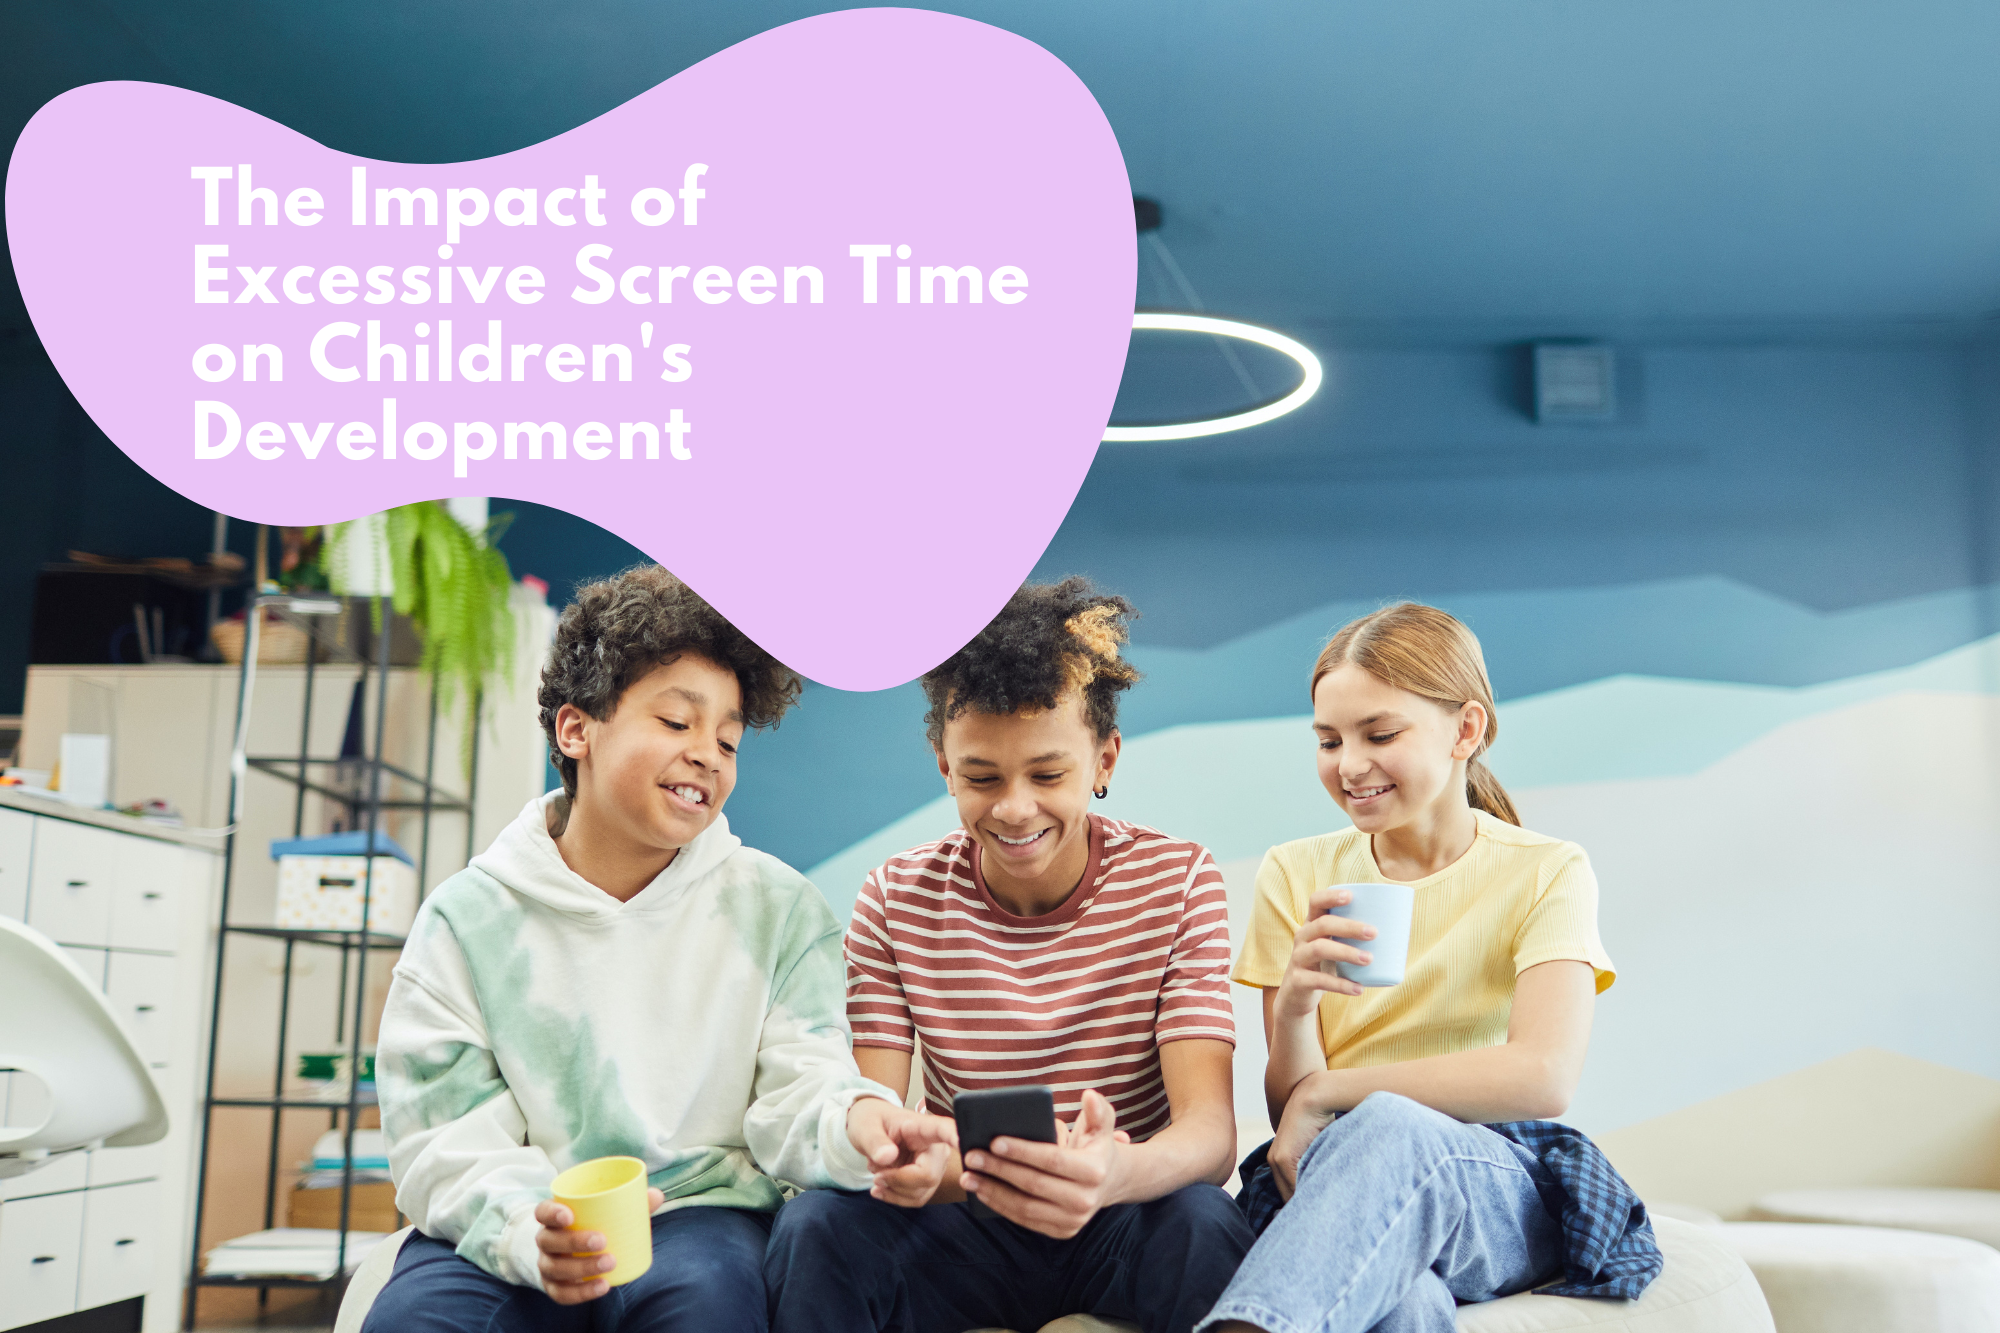 The Impact of Excessive Screen Time on Children's Development